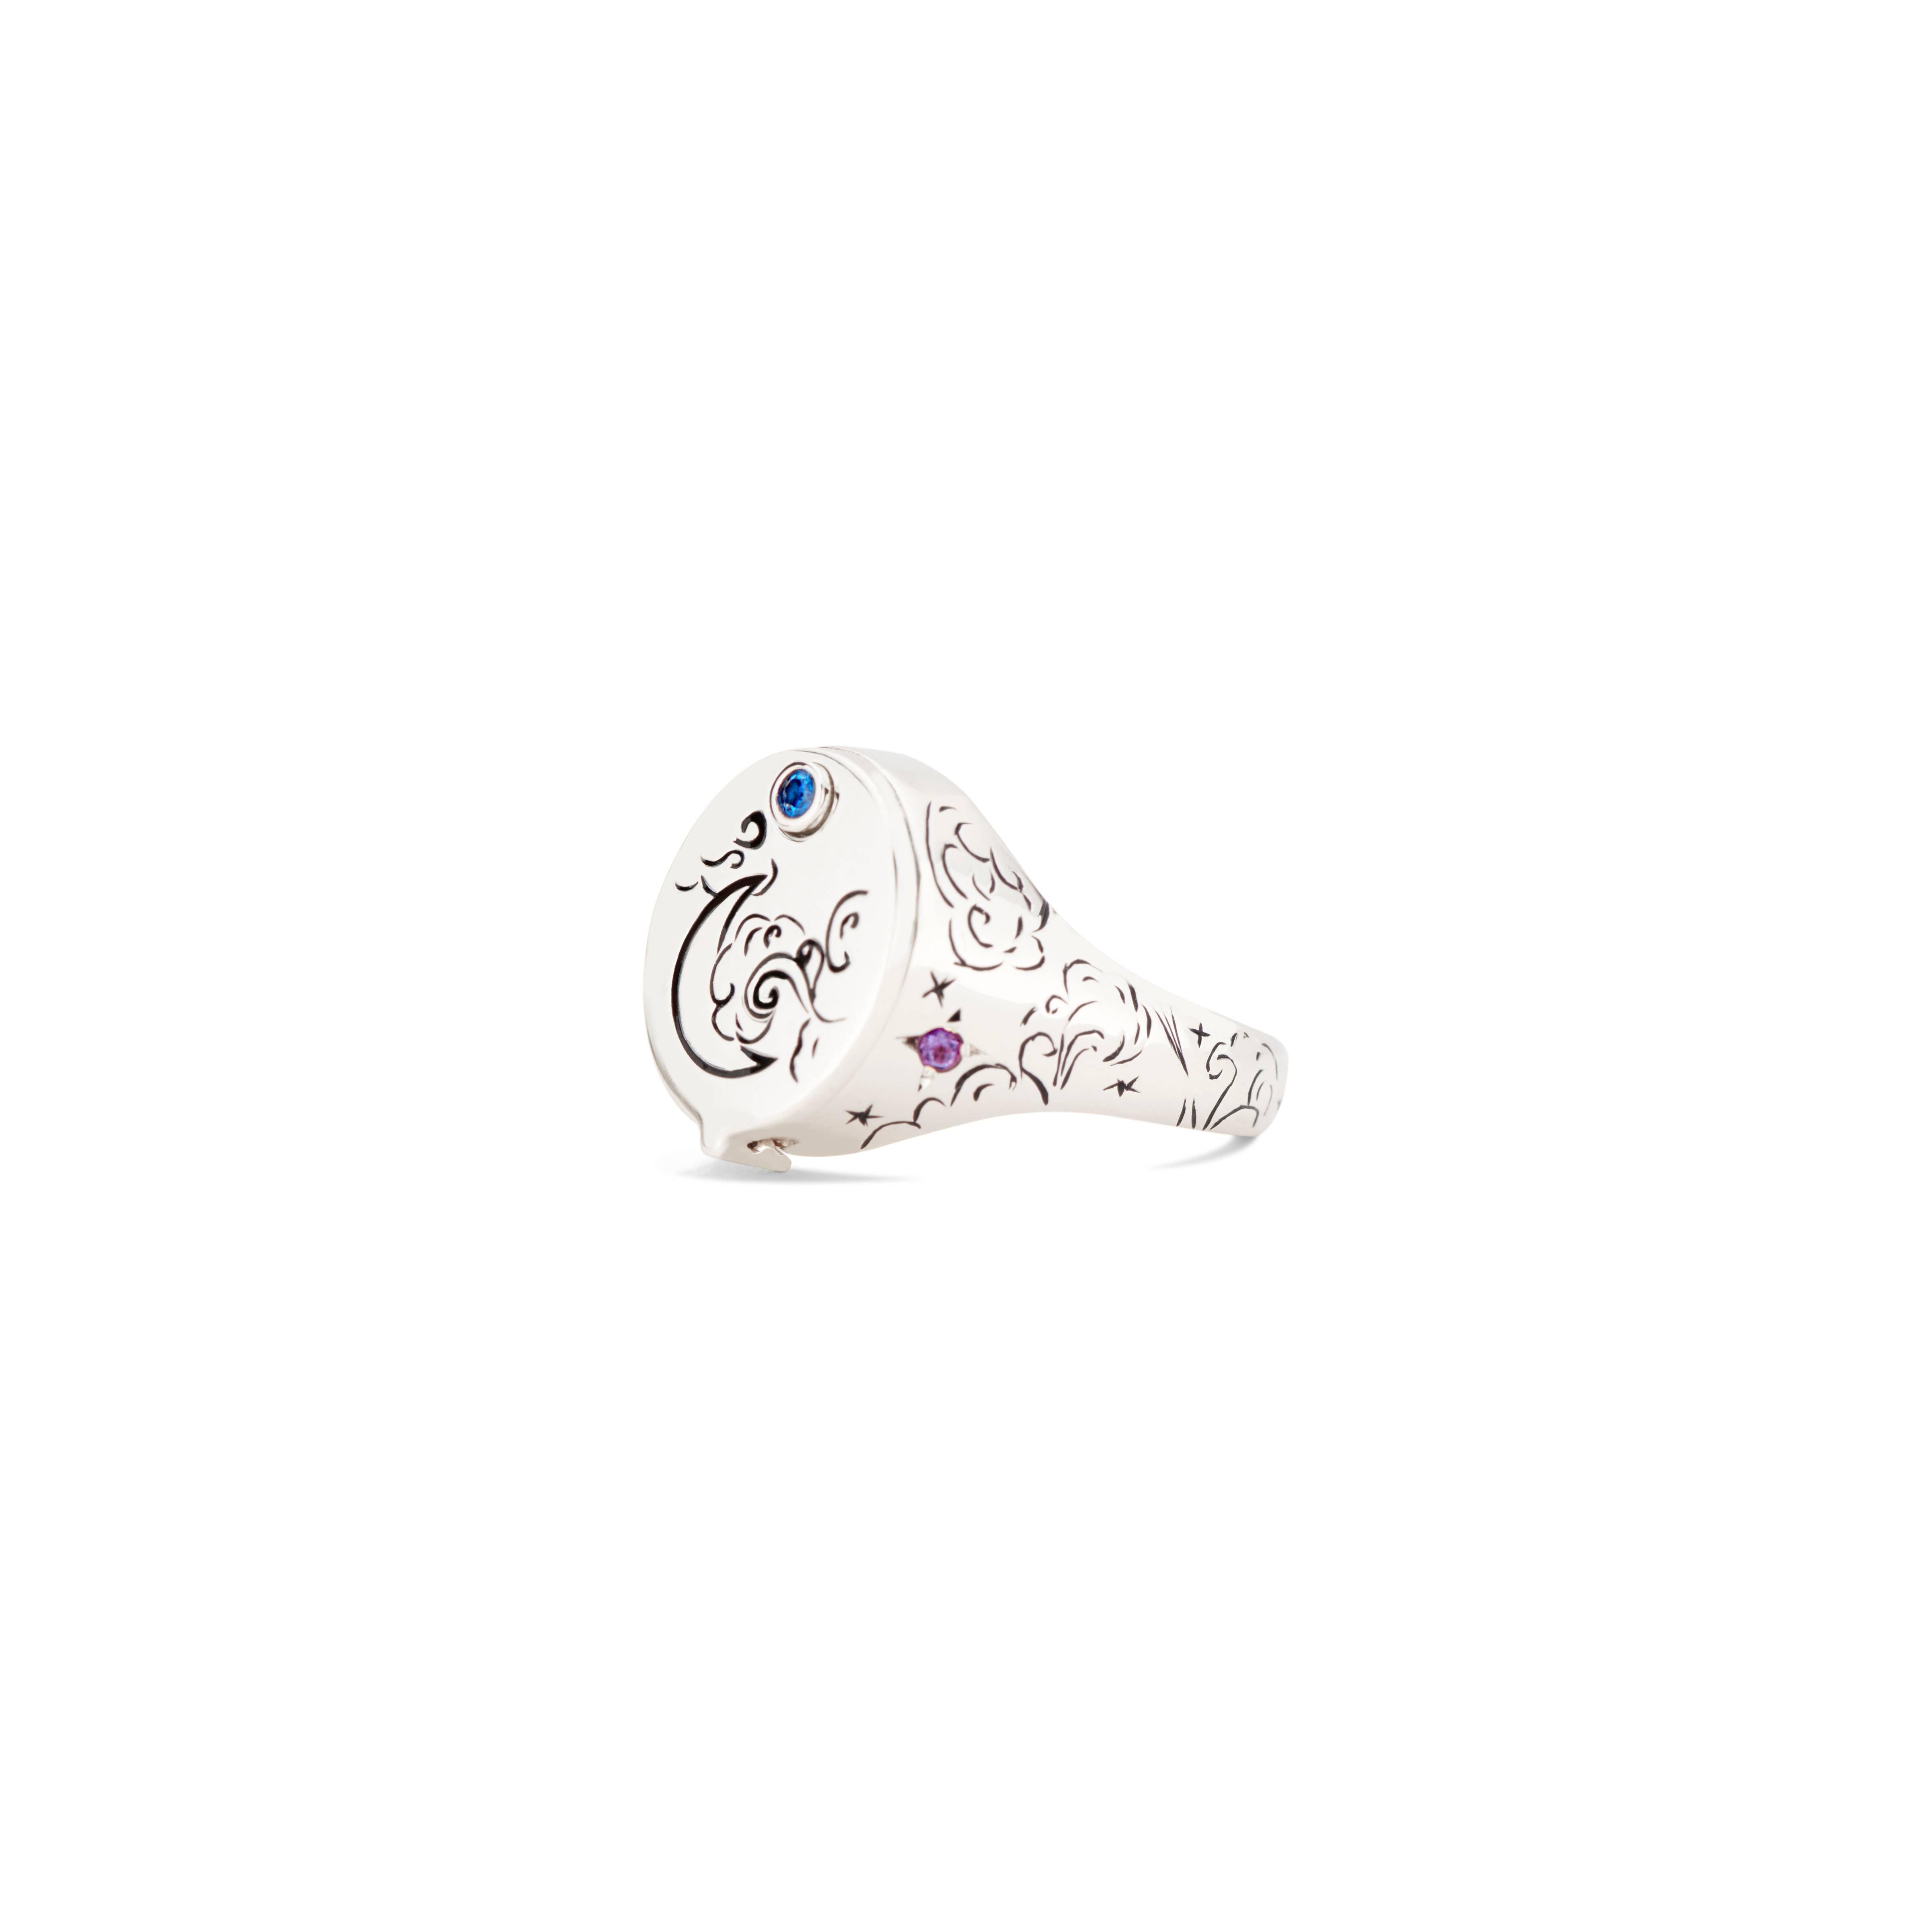 The uniquely sleek 18k white gold and rainbow sapphire Beacon Conservatory Signet features a 